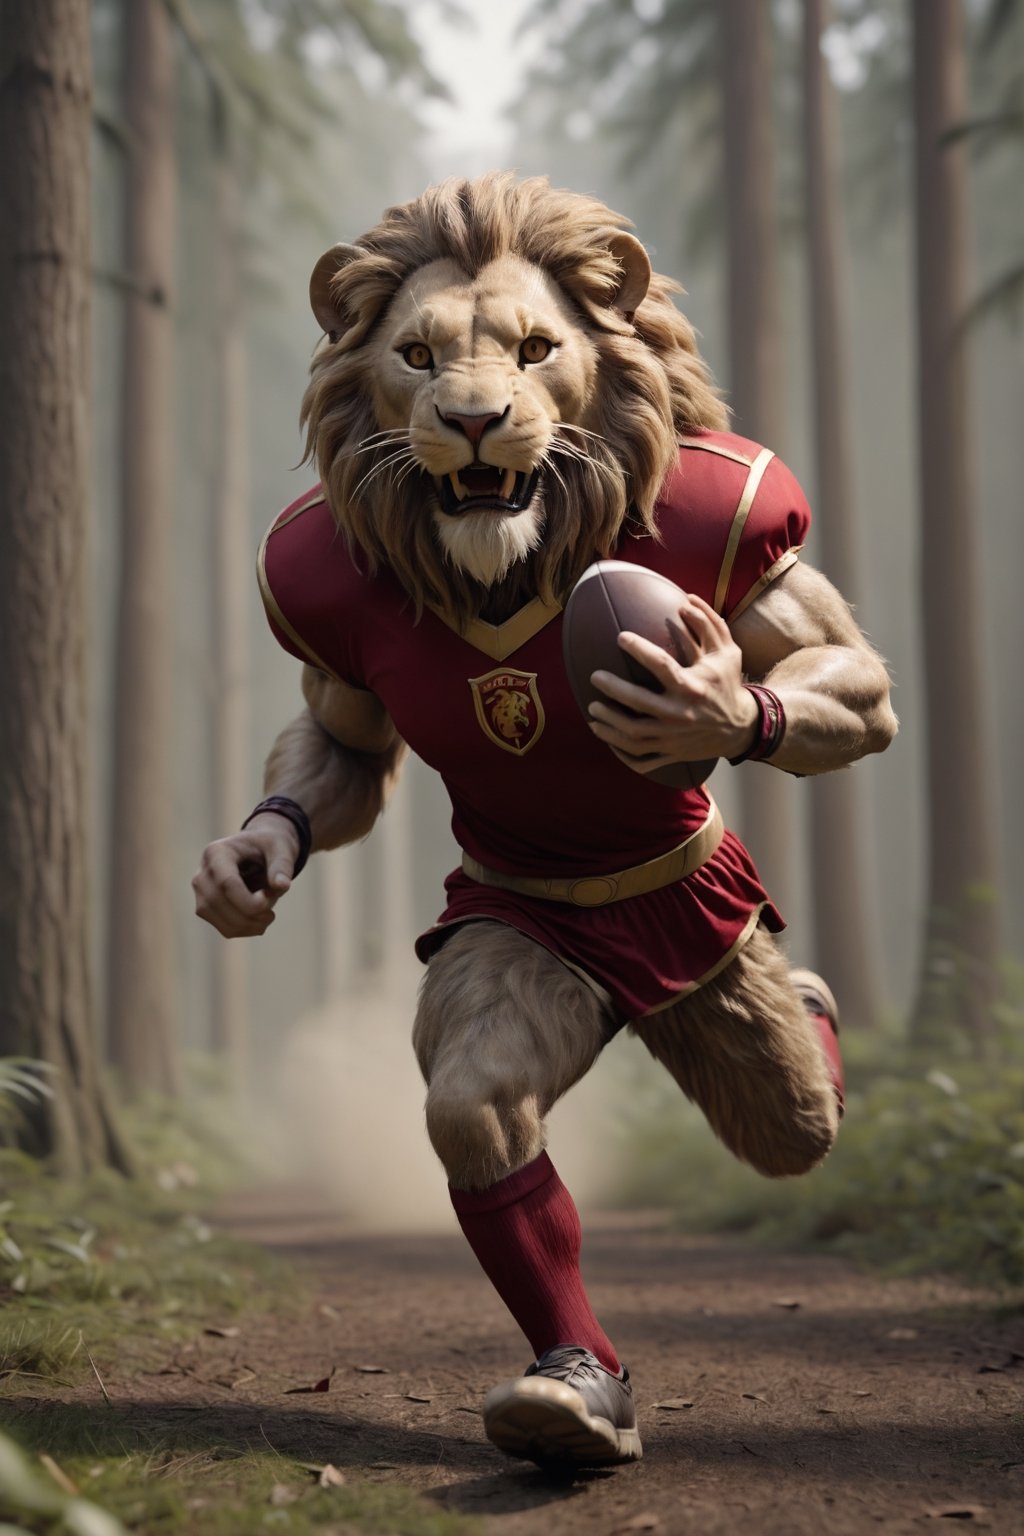 fury lion lord insanely running after stealing the football from a daddy mouse in the forest, cinematic